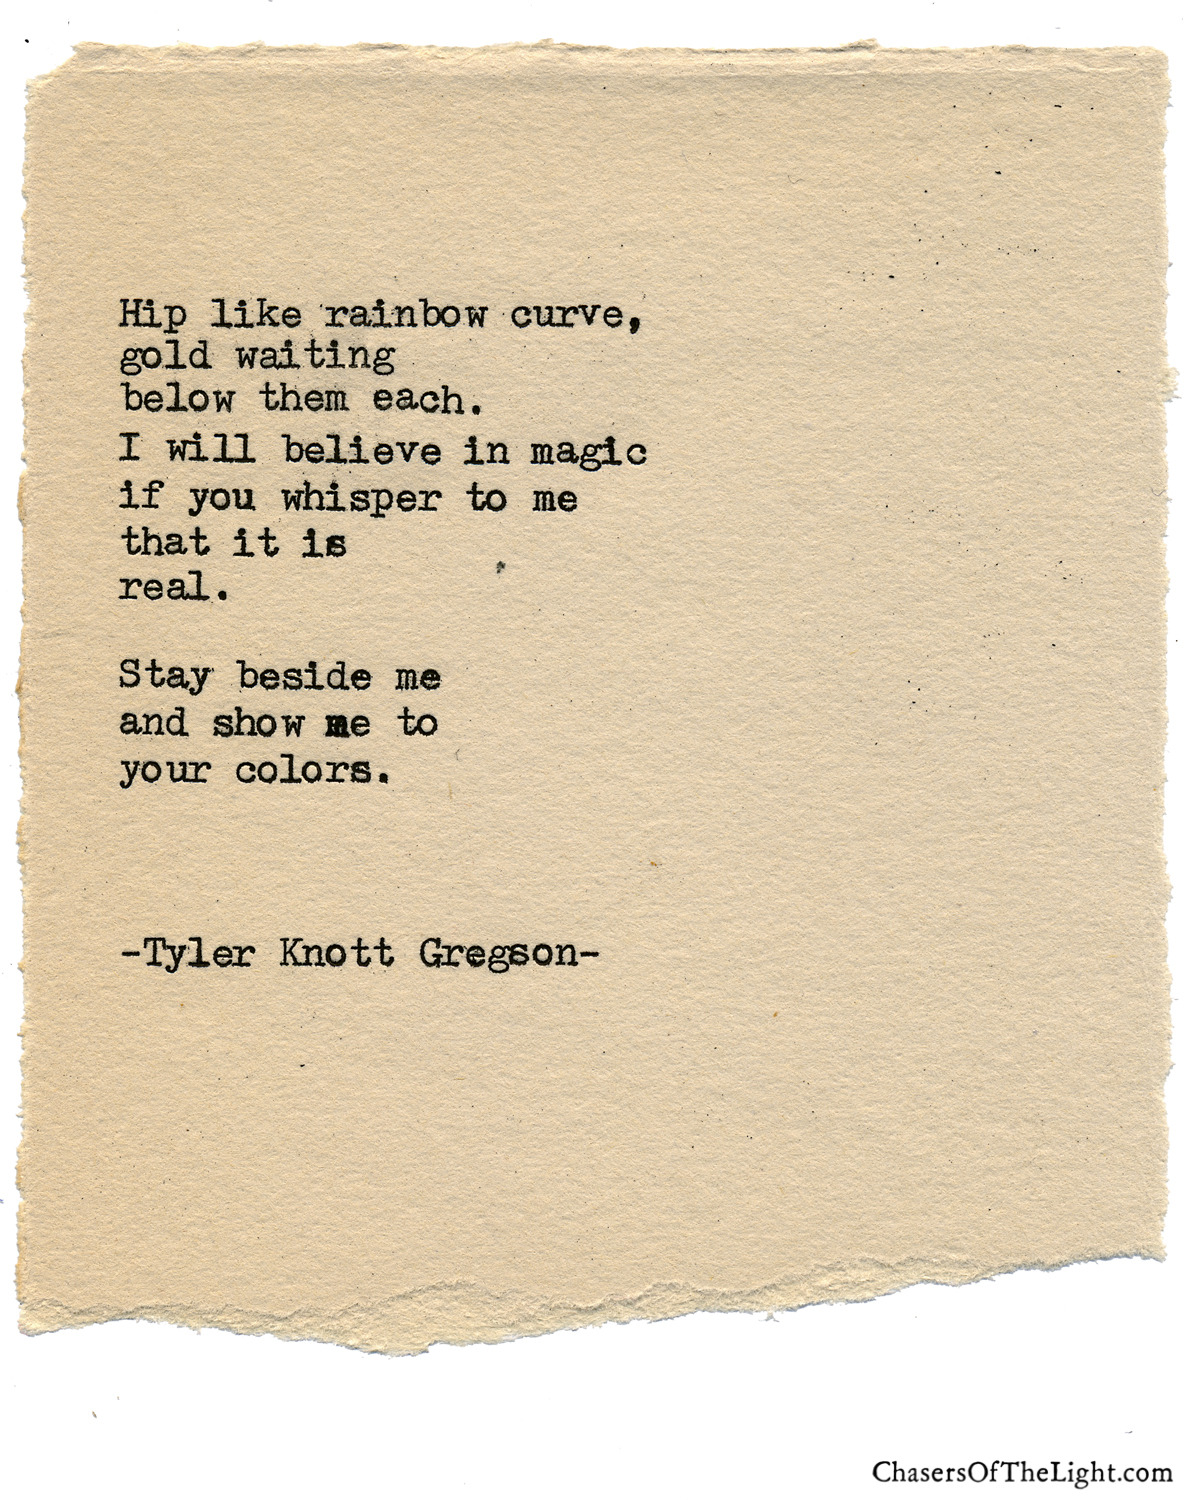 56 Tyler Knott Gregson Quotes to Inspire and Motivate